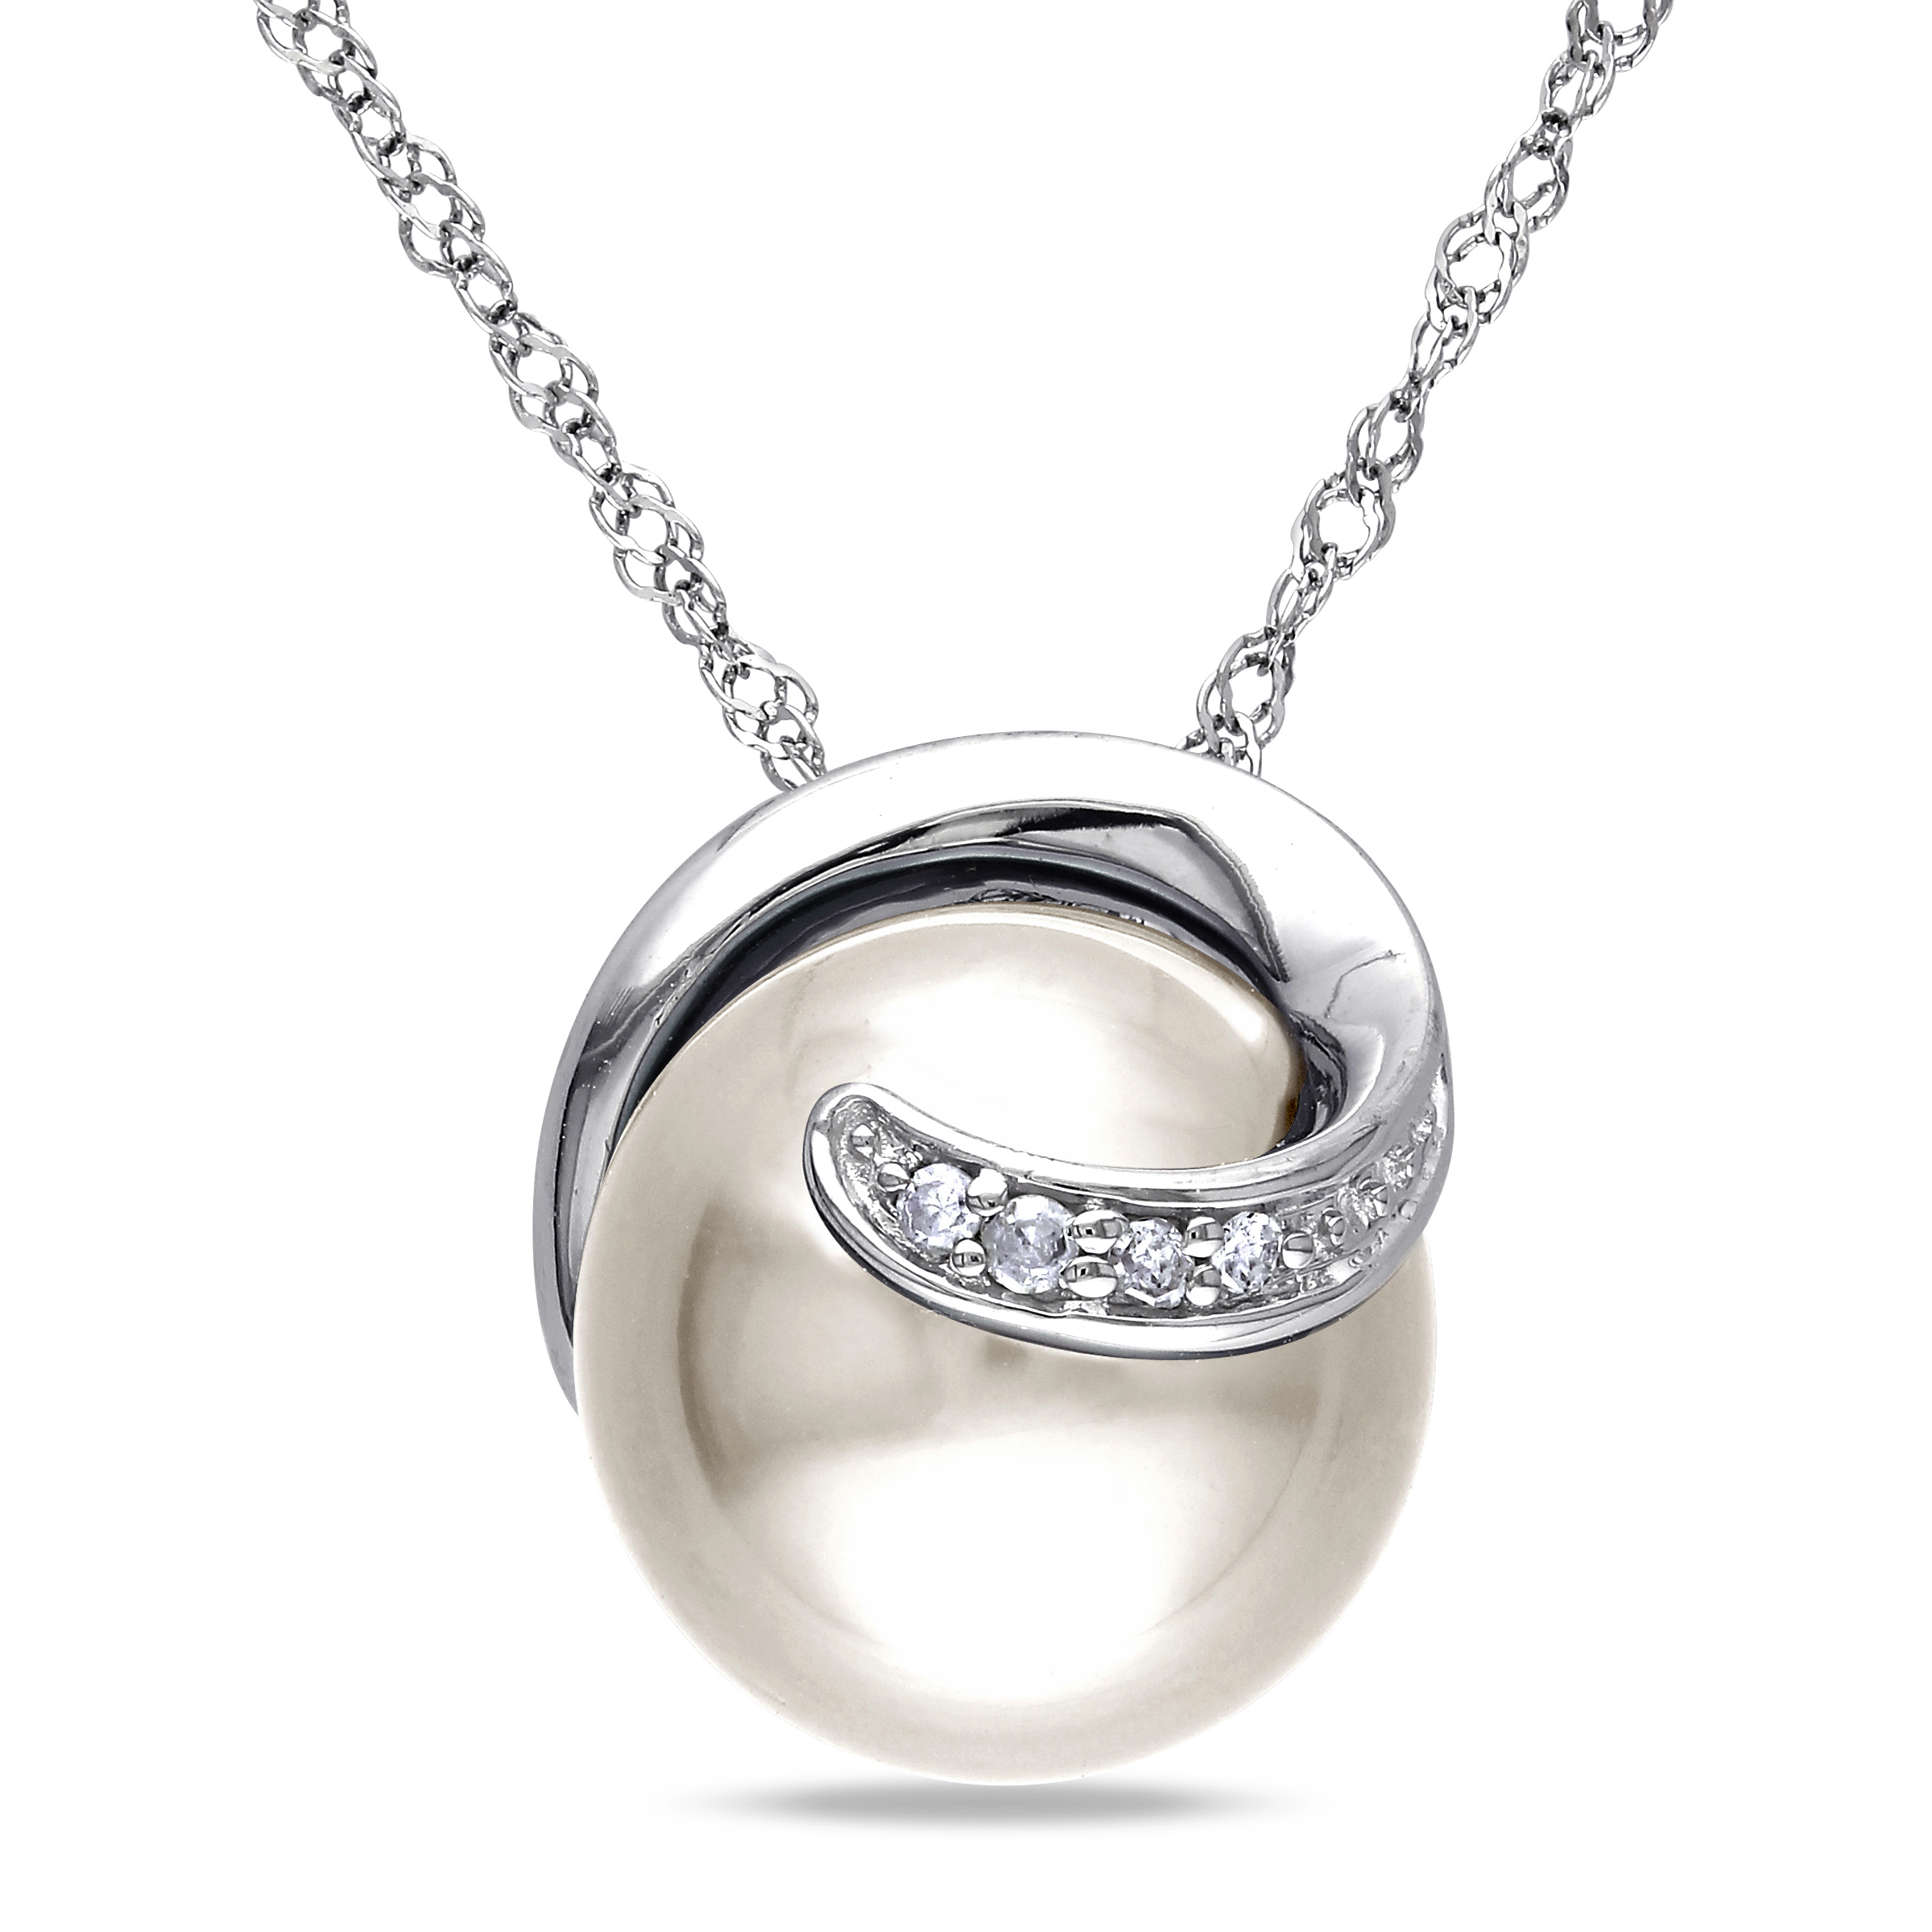 9 - 9.5 MM Cultured Freshwater Pearl and Diamond Swirl Pendant with Singapore Chain in 10k White Gold